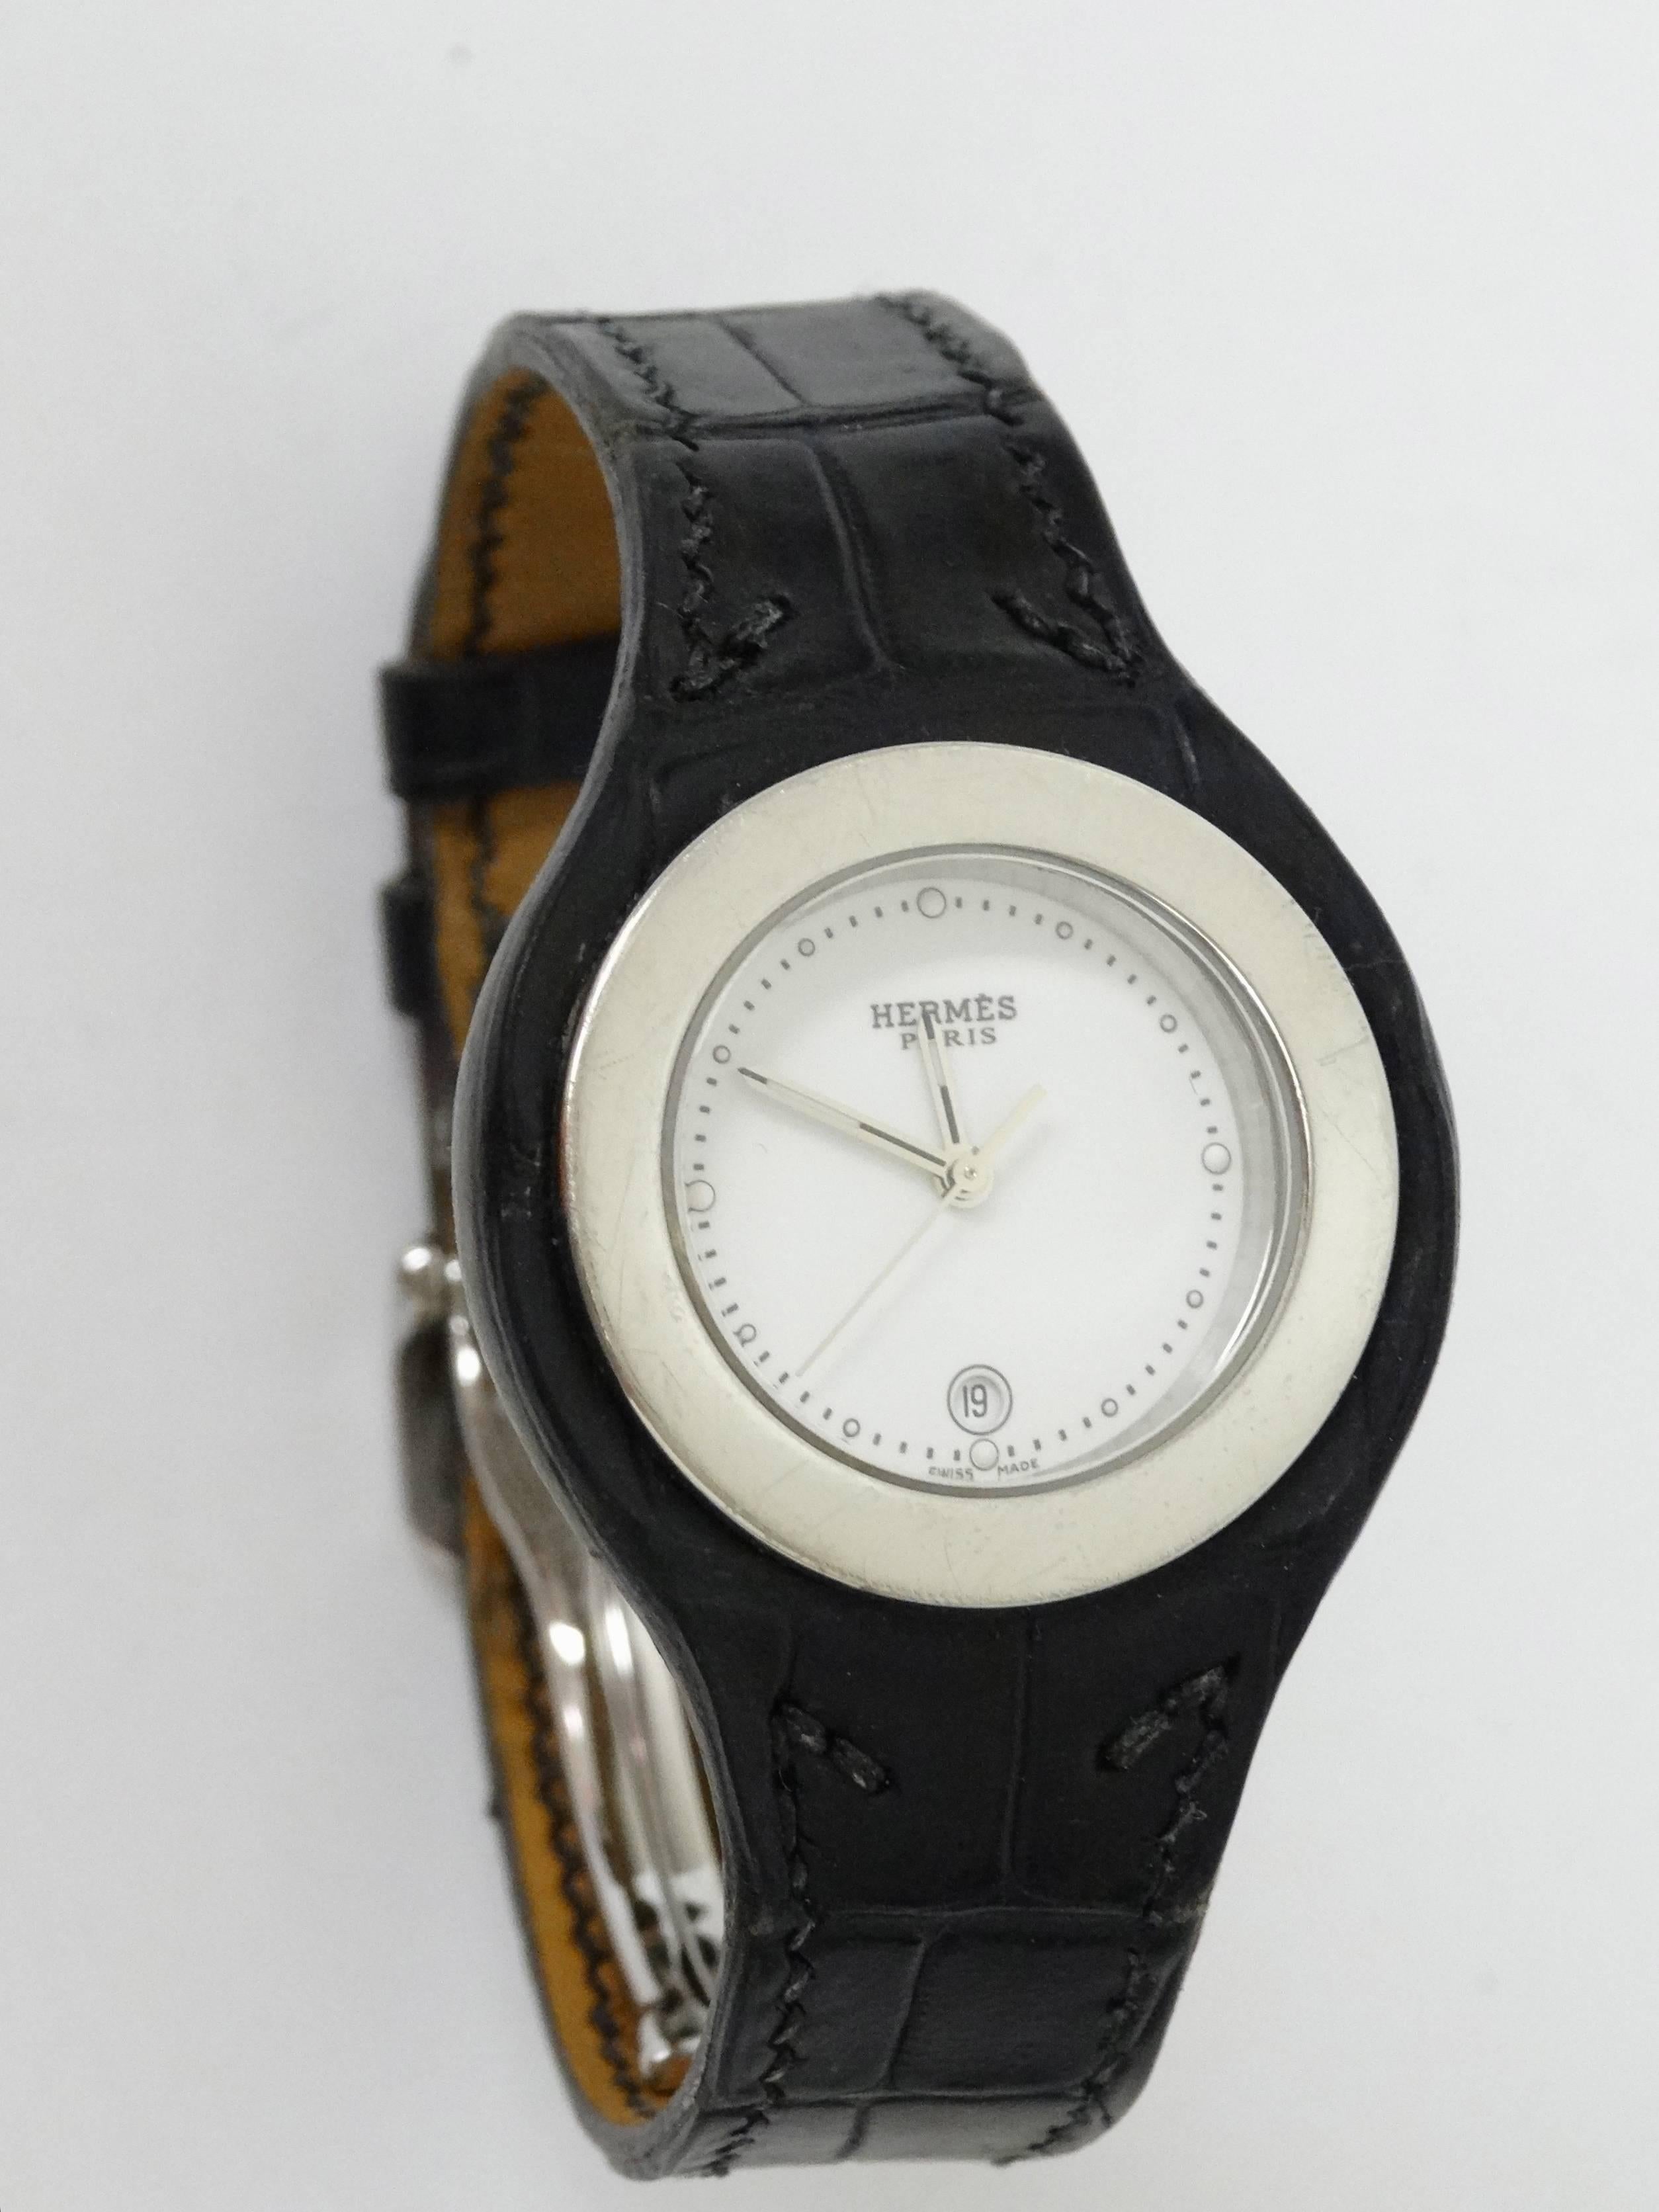 Ladies HERMÈS HARNAIS stainless steel 27mm wrist watch with a jet black gator strap marked Bracelet Hermes. Style Number HA3.210  Swiss made quartz watch with sapphire crystal, smooth bezel, white flat dial, dot hour markers, luminous hands, date